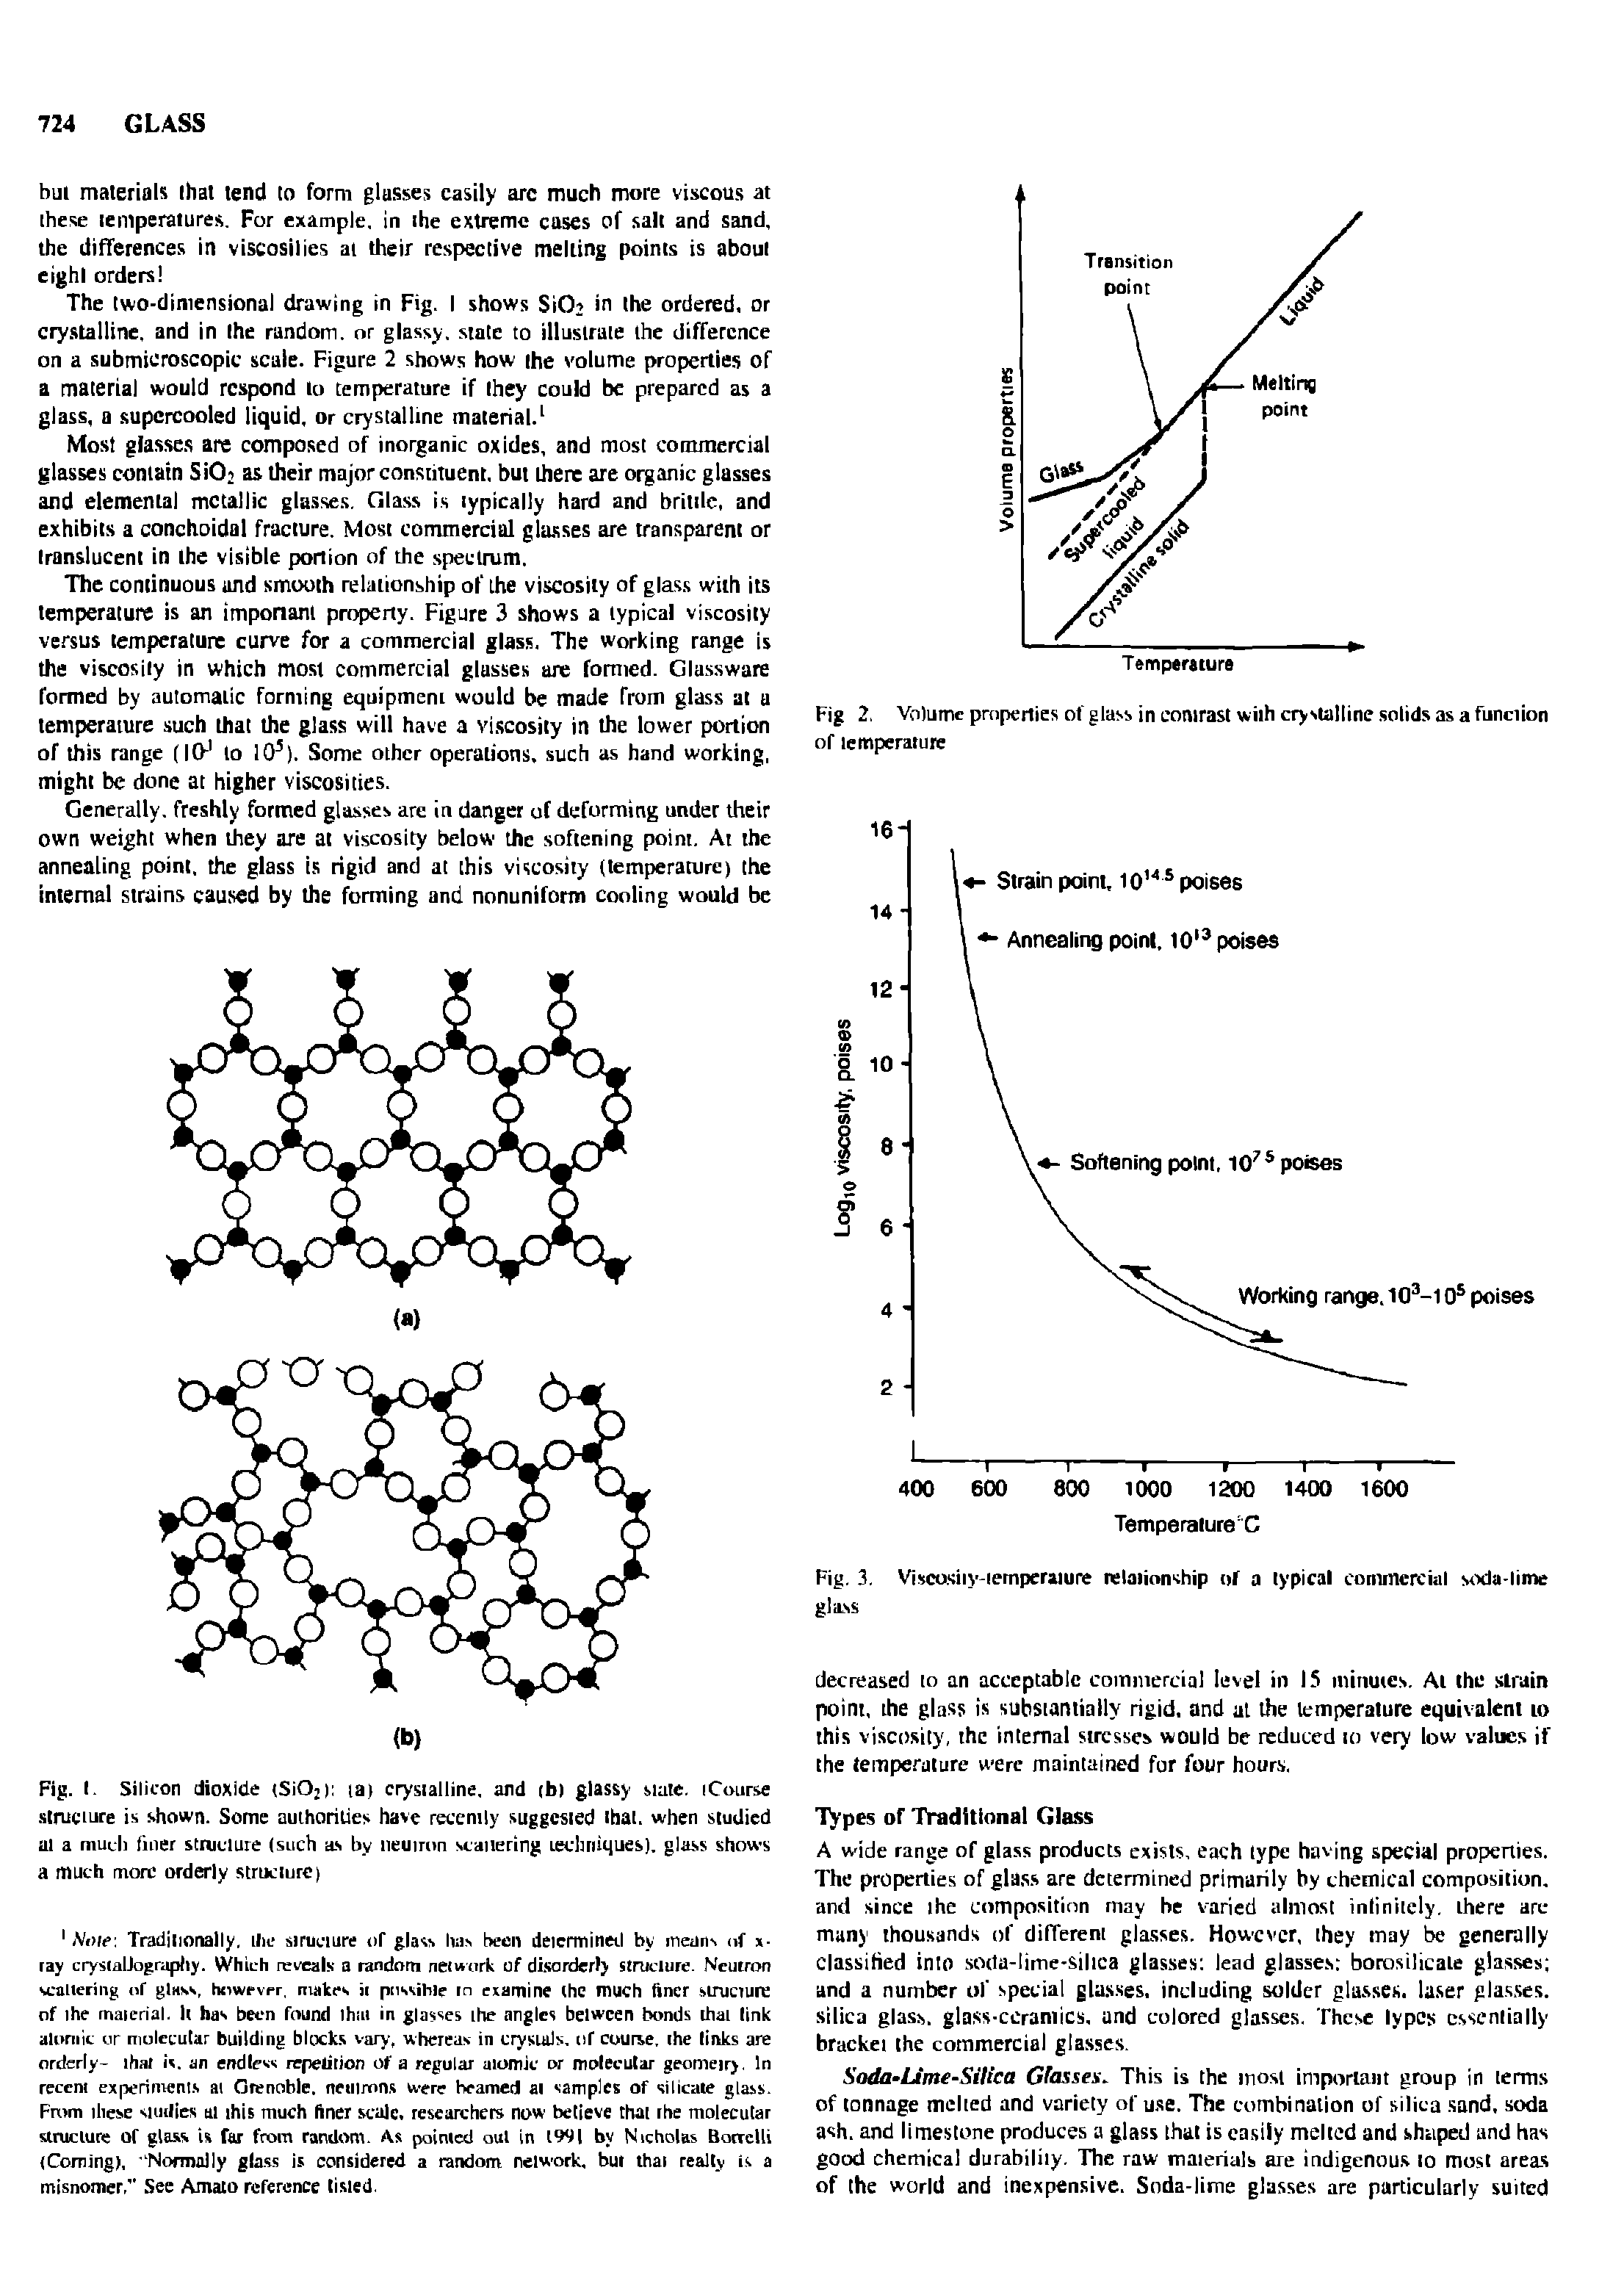 Fig. I. Silicon dioxide (Si02) iai crystalline, and (b) glassy state, iCourse structure is shown. Some authorities have recently suggested that, when studied at a much liner structure (such as by neutron scattering techniques), glass shows a much more orderly structure)...